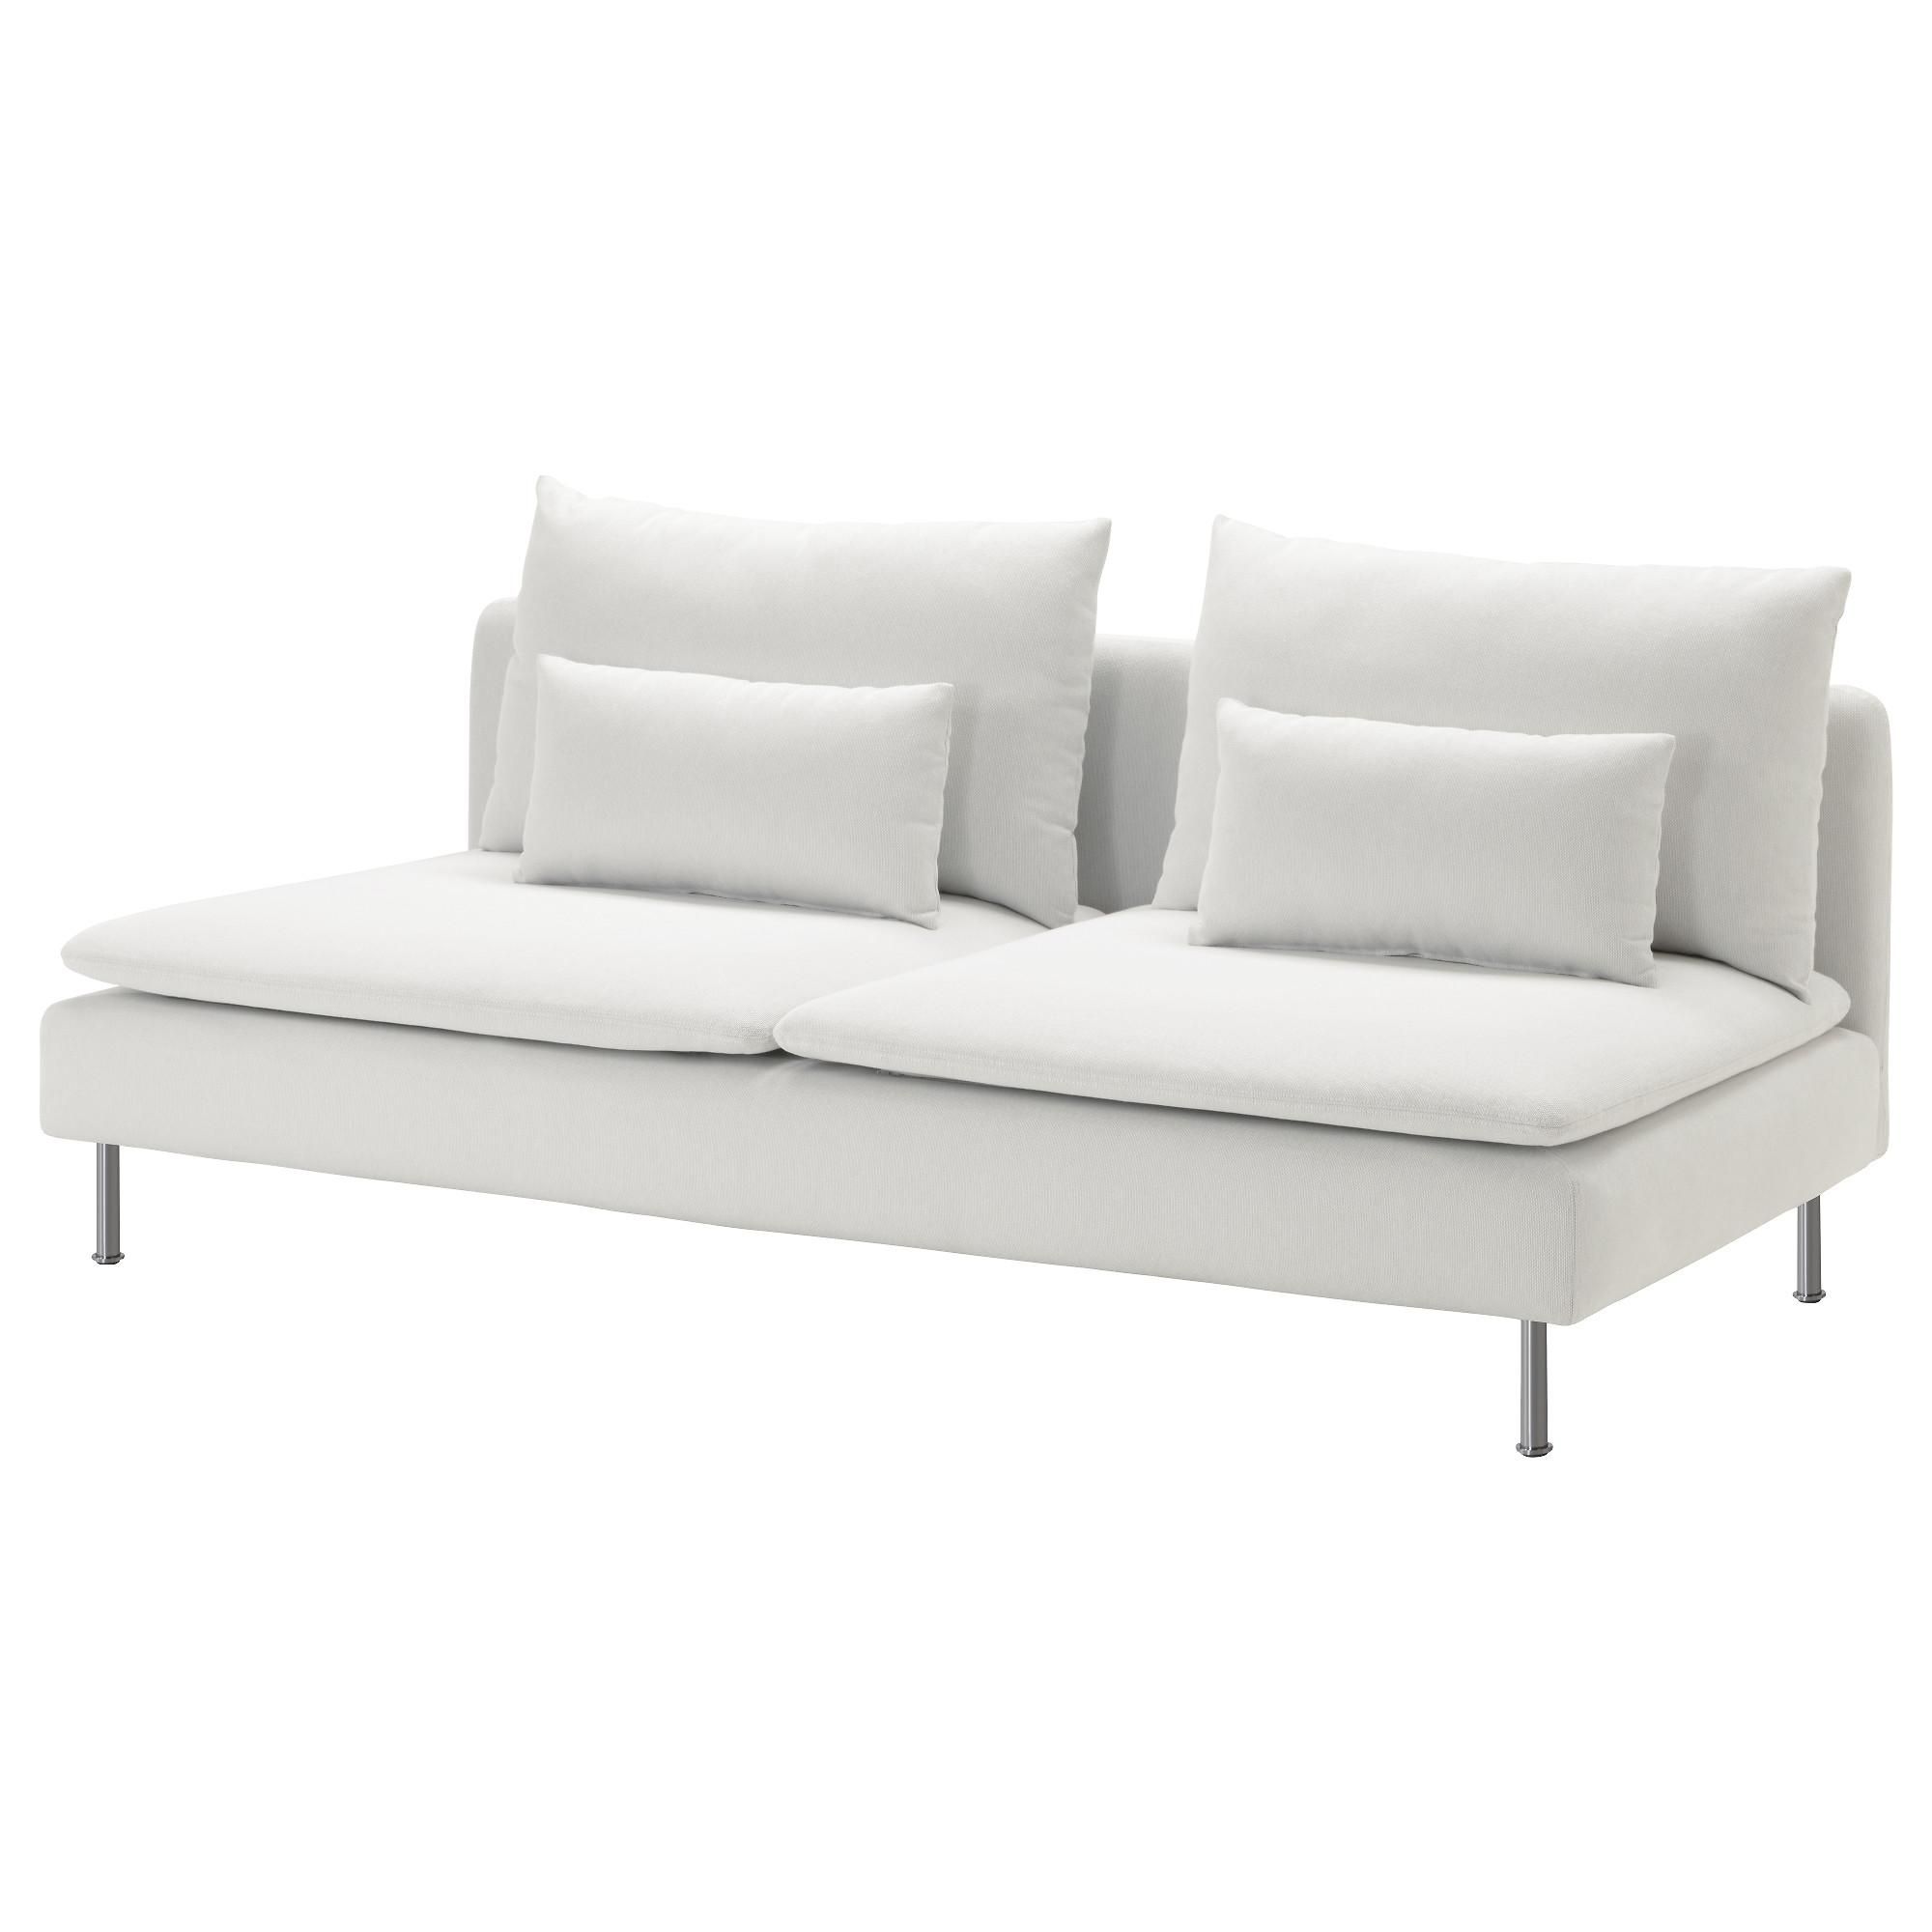 Sofas Center : White Sofa Chair Awesome Pictures Inspirations For White Sofa Chairs (View 14 of 20)